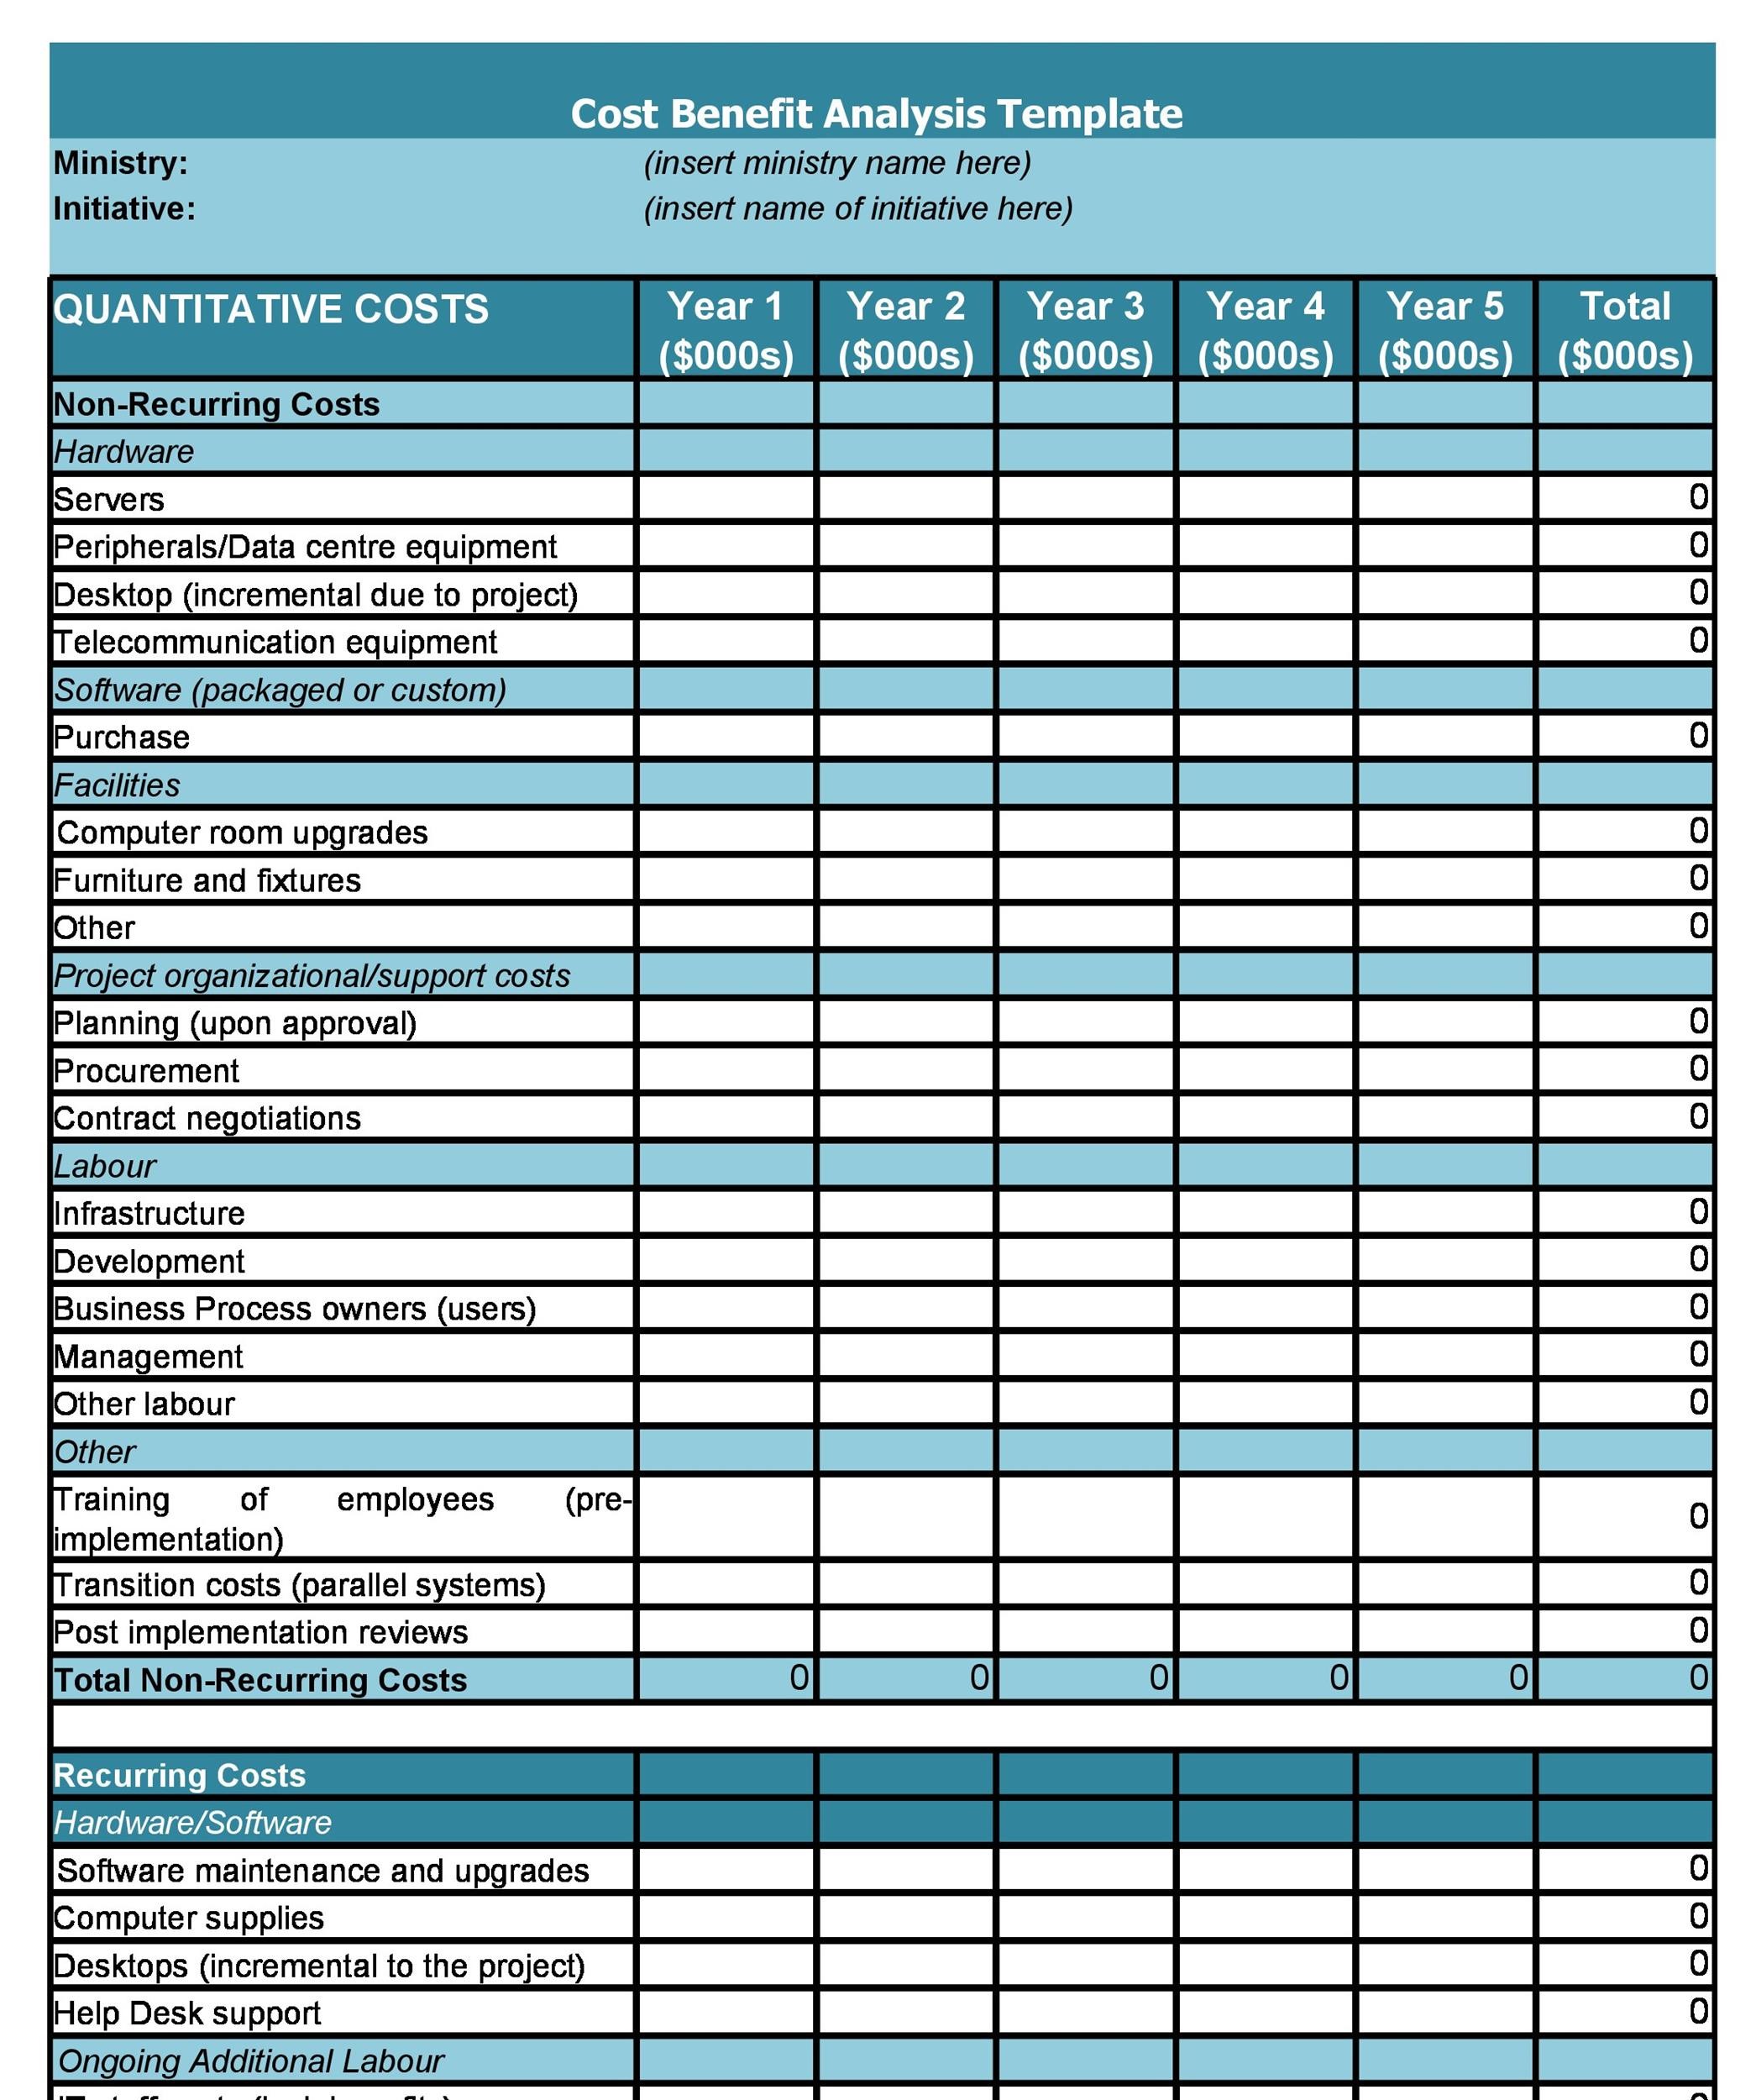 40 Cost Benefit Analysis Templates Examples TemplateLab